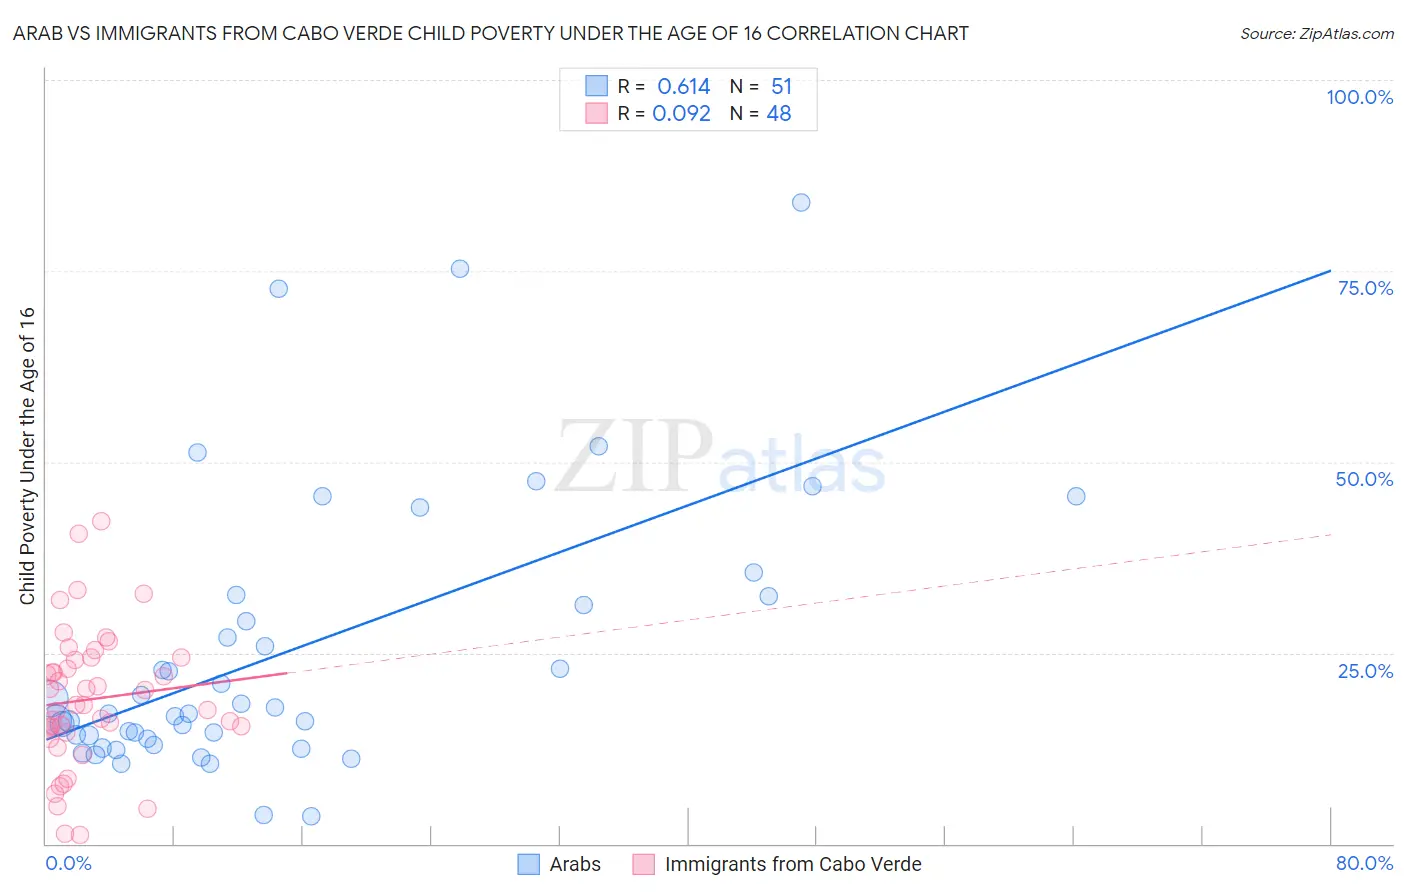 Arab vs Immigrants from Cabo Verde Child Poverty Under the Age of 16